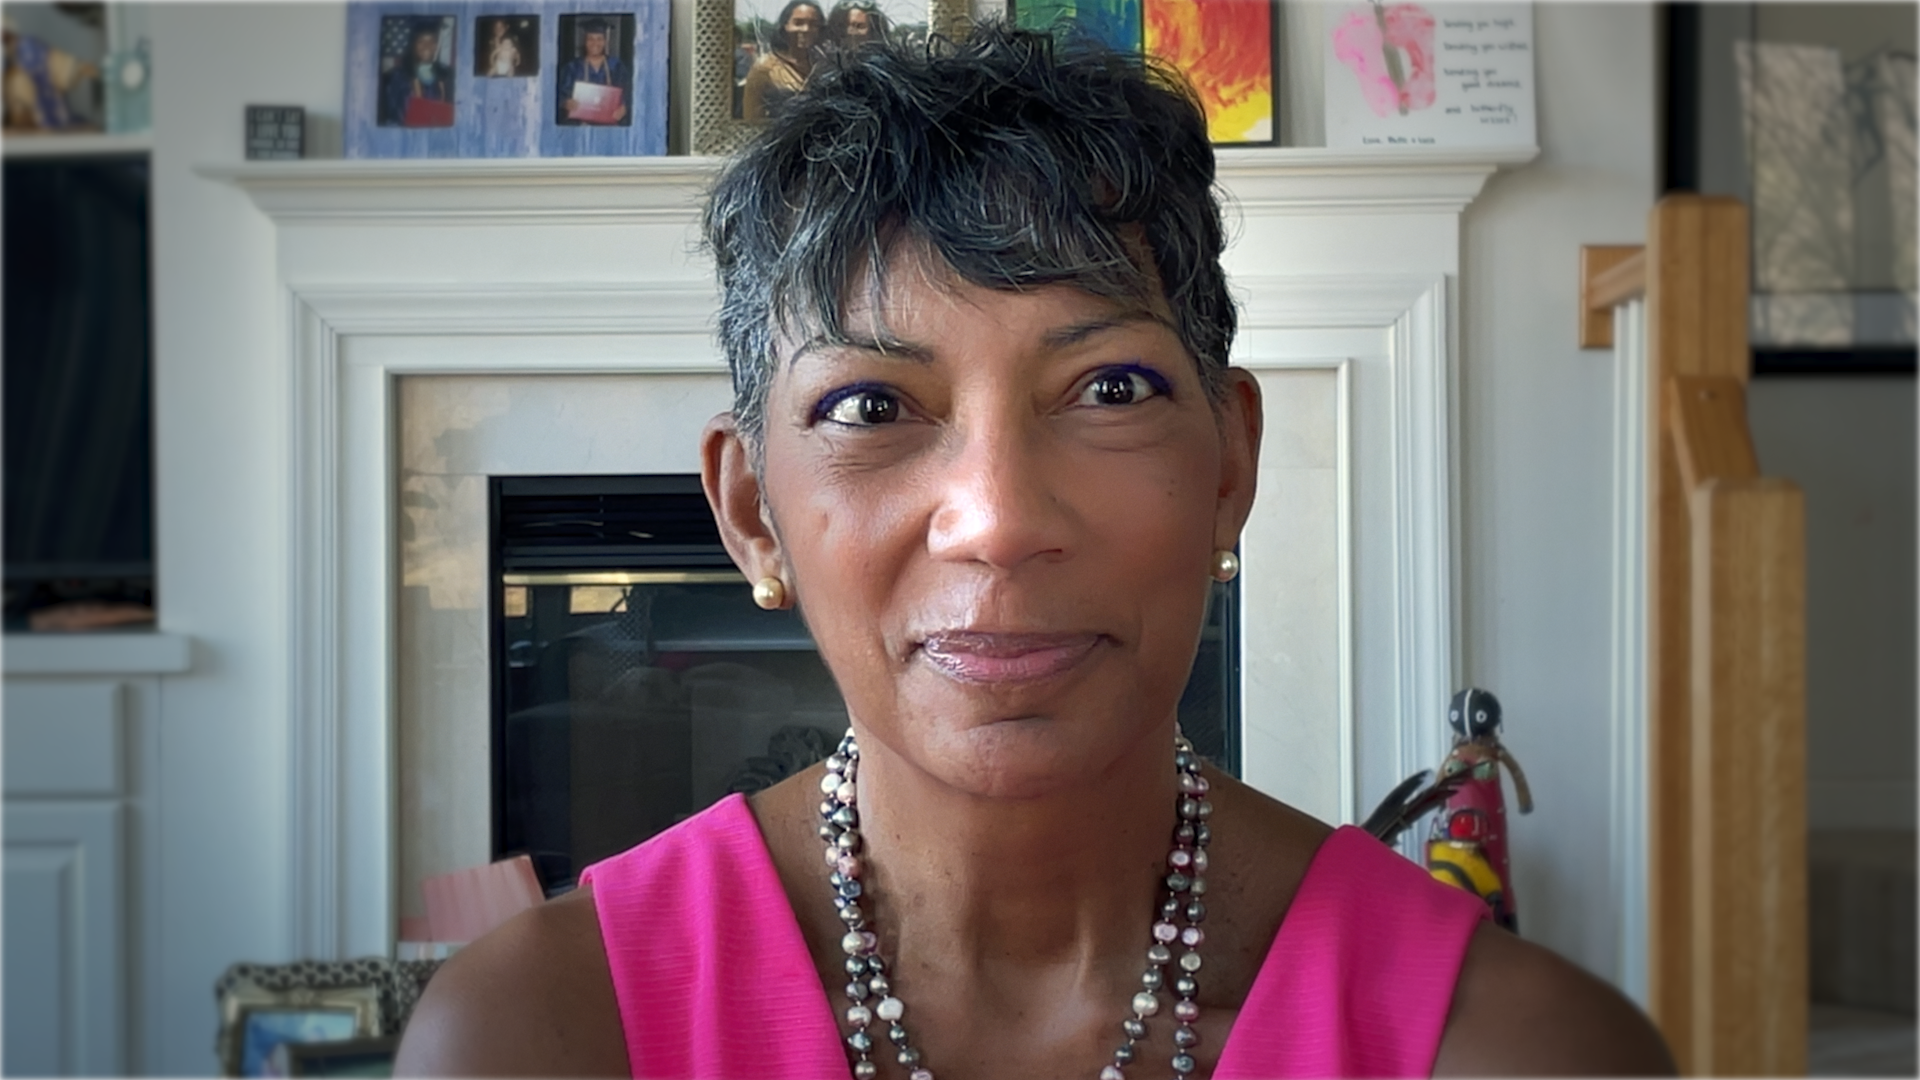 Ricki is an older Black woman with short hair, wearing earrings and a beaded necklace and pink shirt.